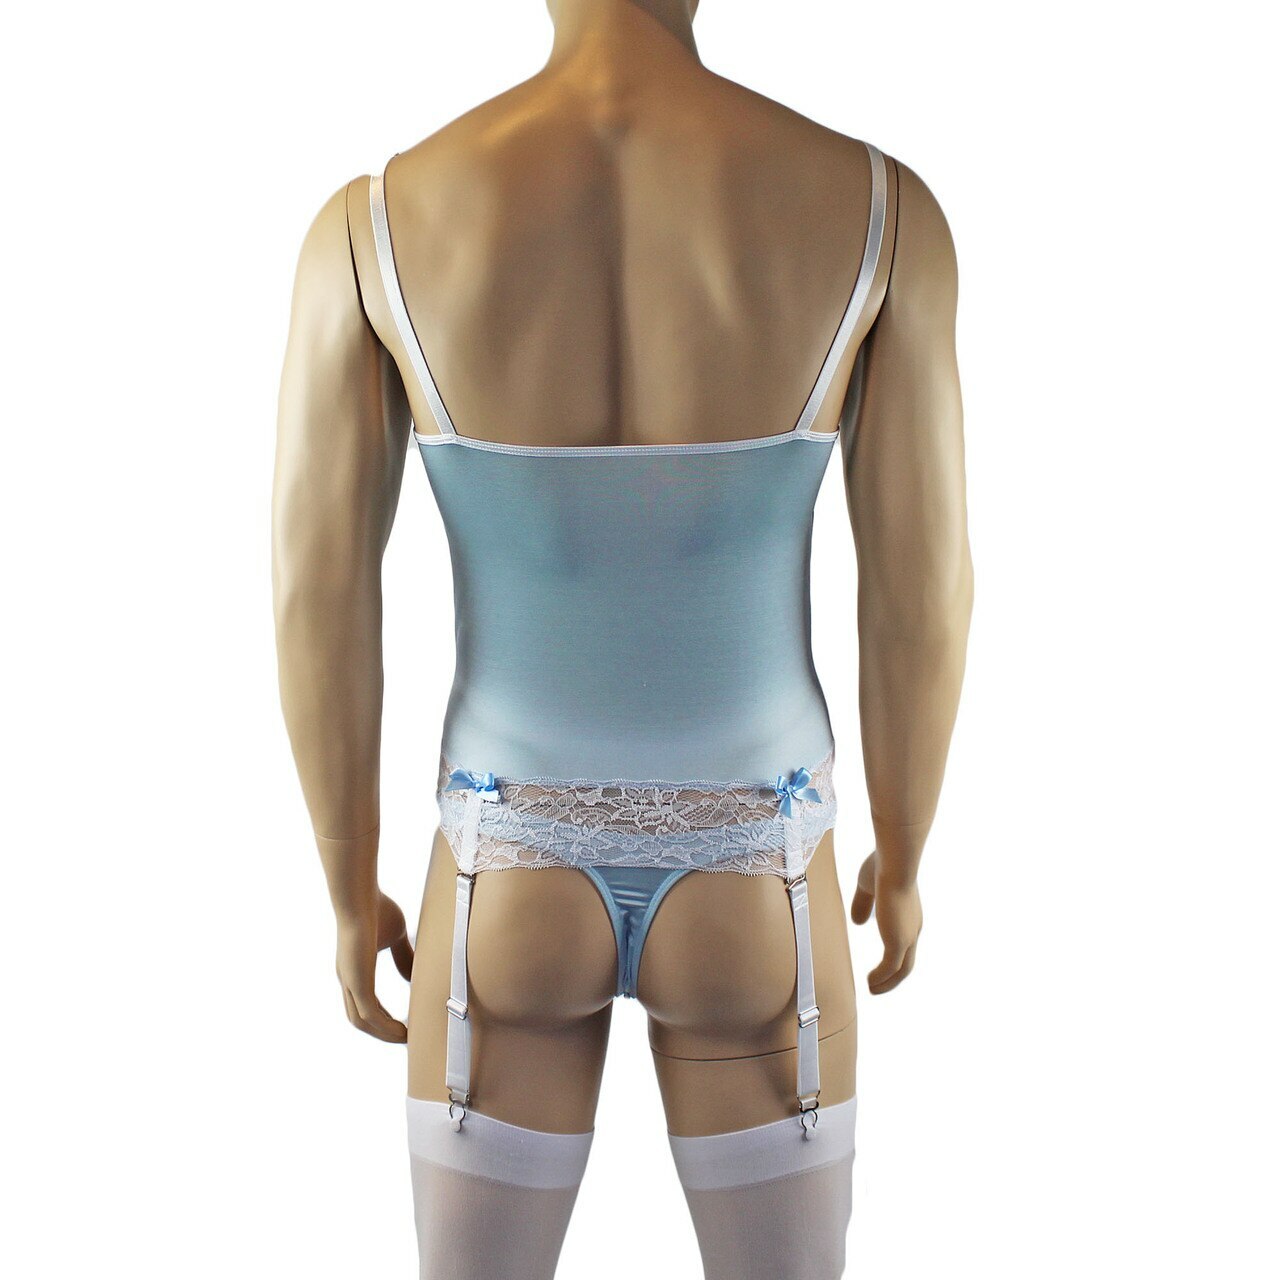 Mens Camisole Bustier Garter Top with Thong & Stockings (light blue plus other colours)